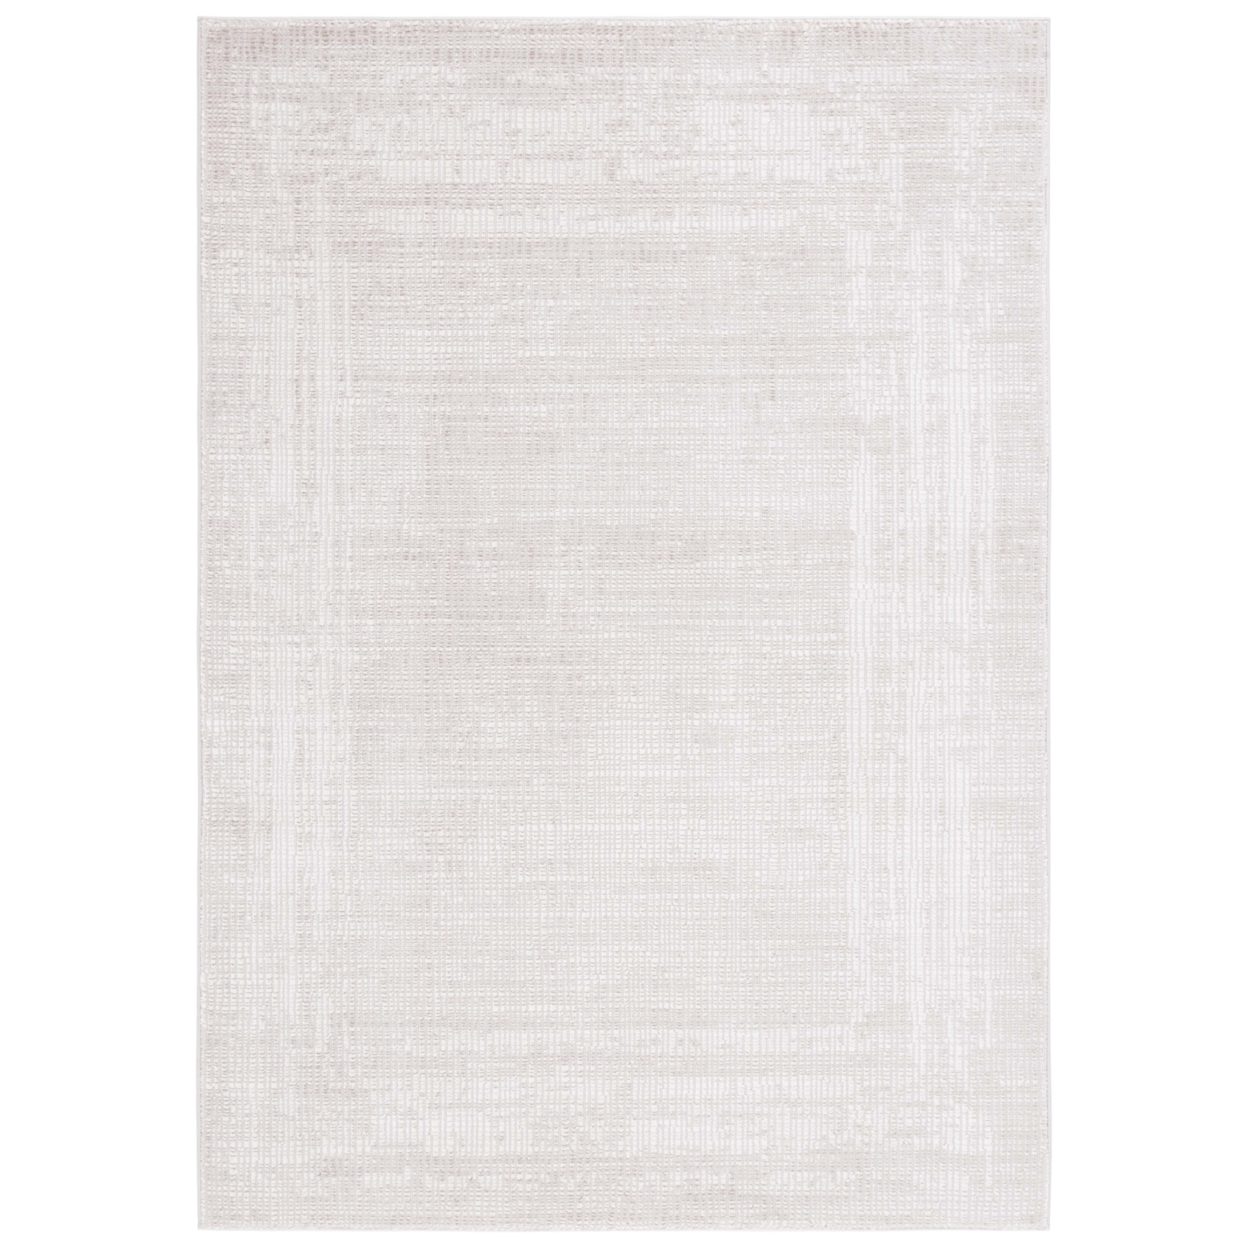 Safavieh CON114A Continental Ivory / Beige - Black / Ivory, 9' X 12' Rectangle